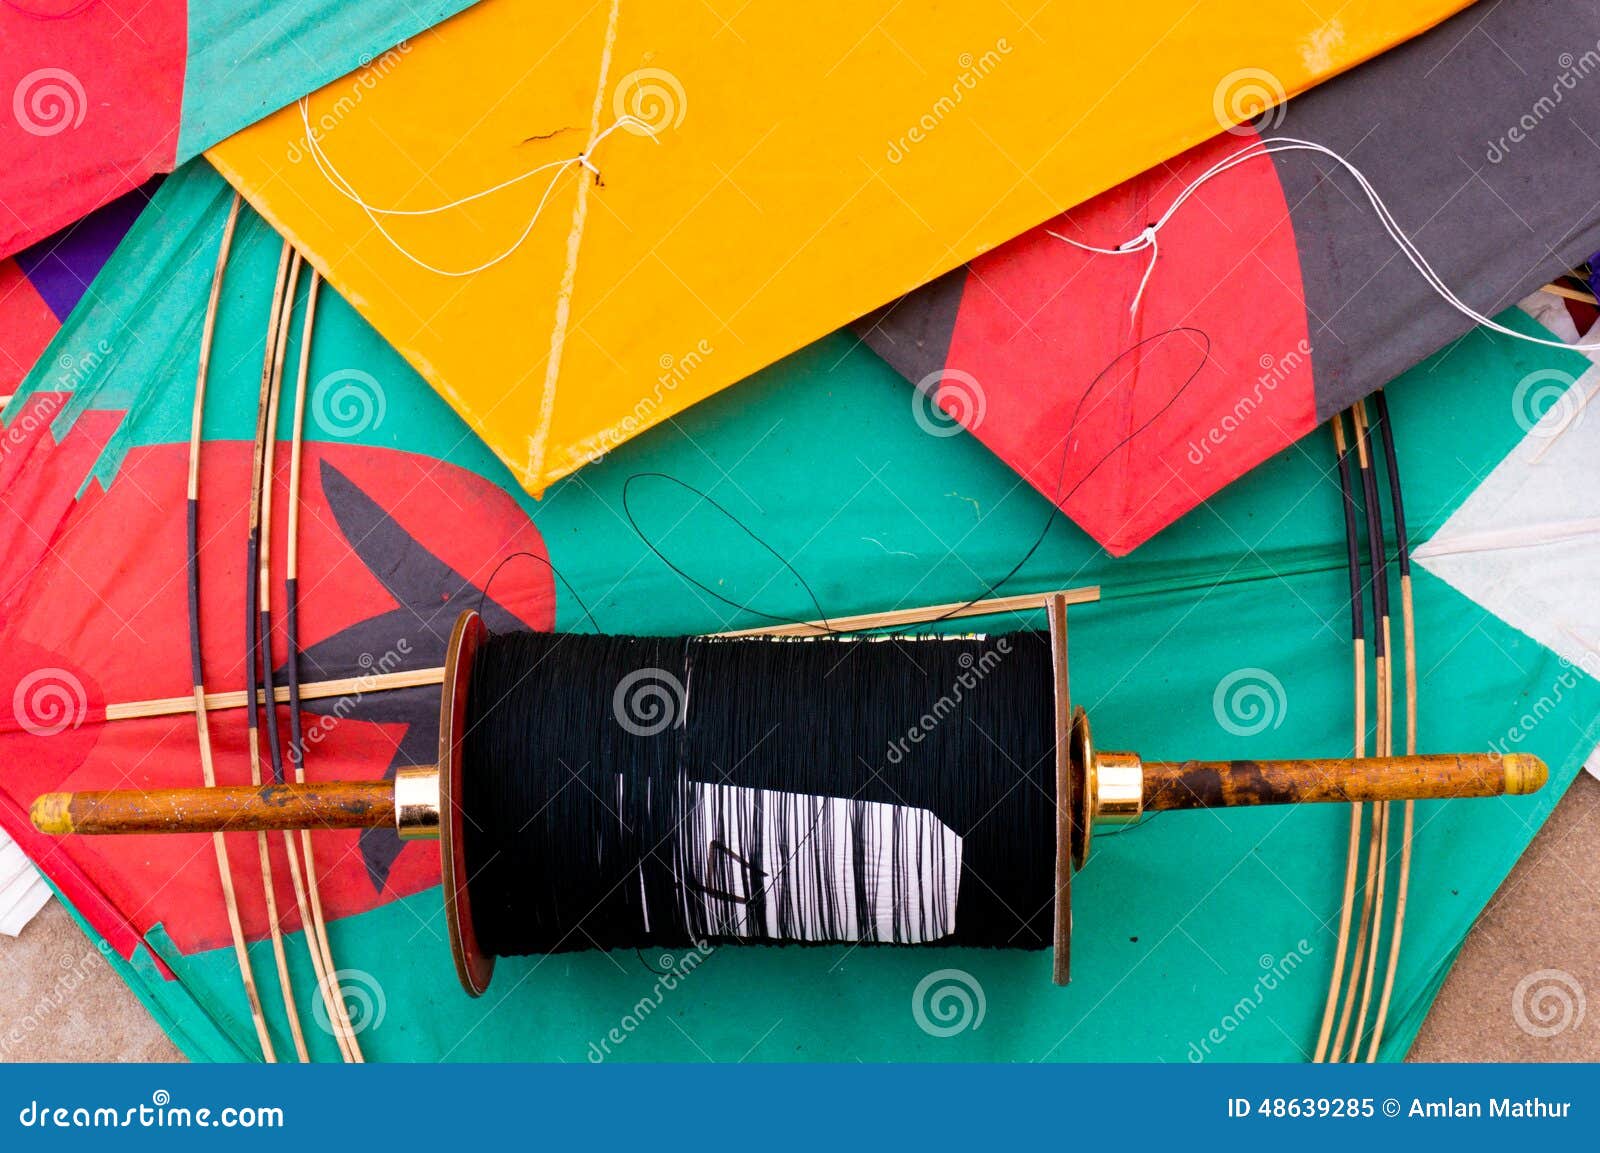 https://thumbs.dreamstime.com/z/colorful-indian-kites-string-paper-used-sport-kite-fighting-special-covered-glass-to-make-sharp-48639285.jpg